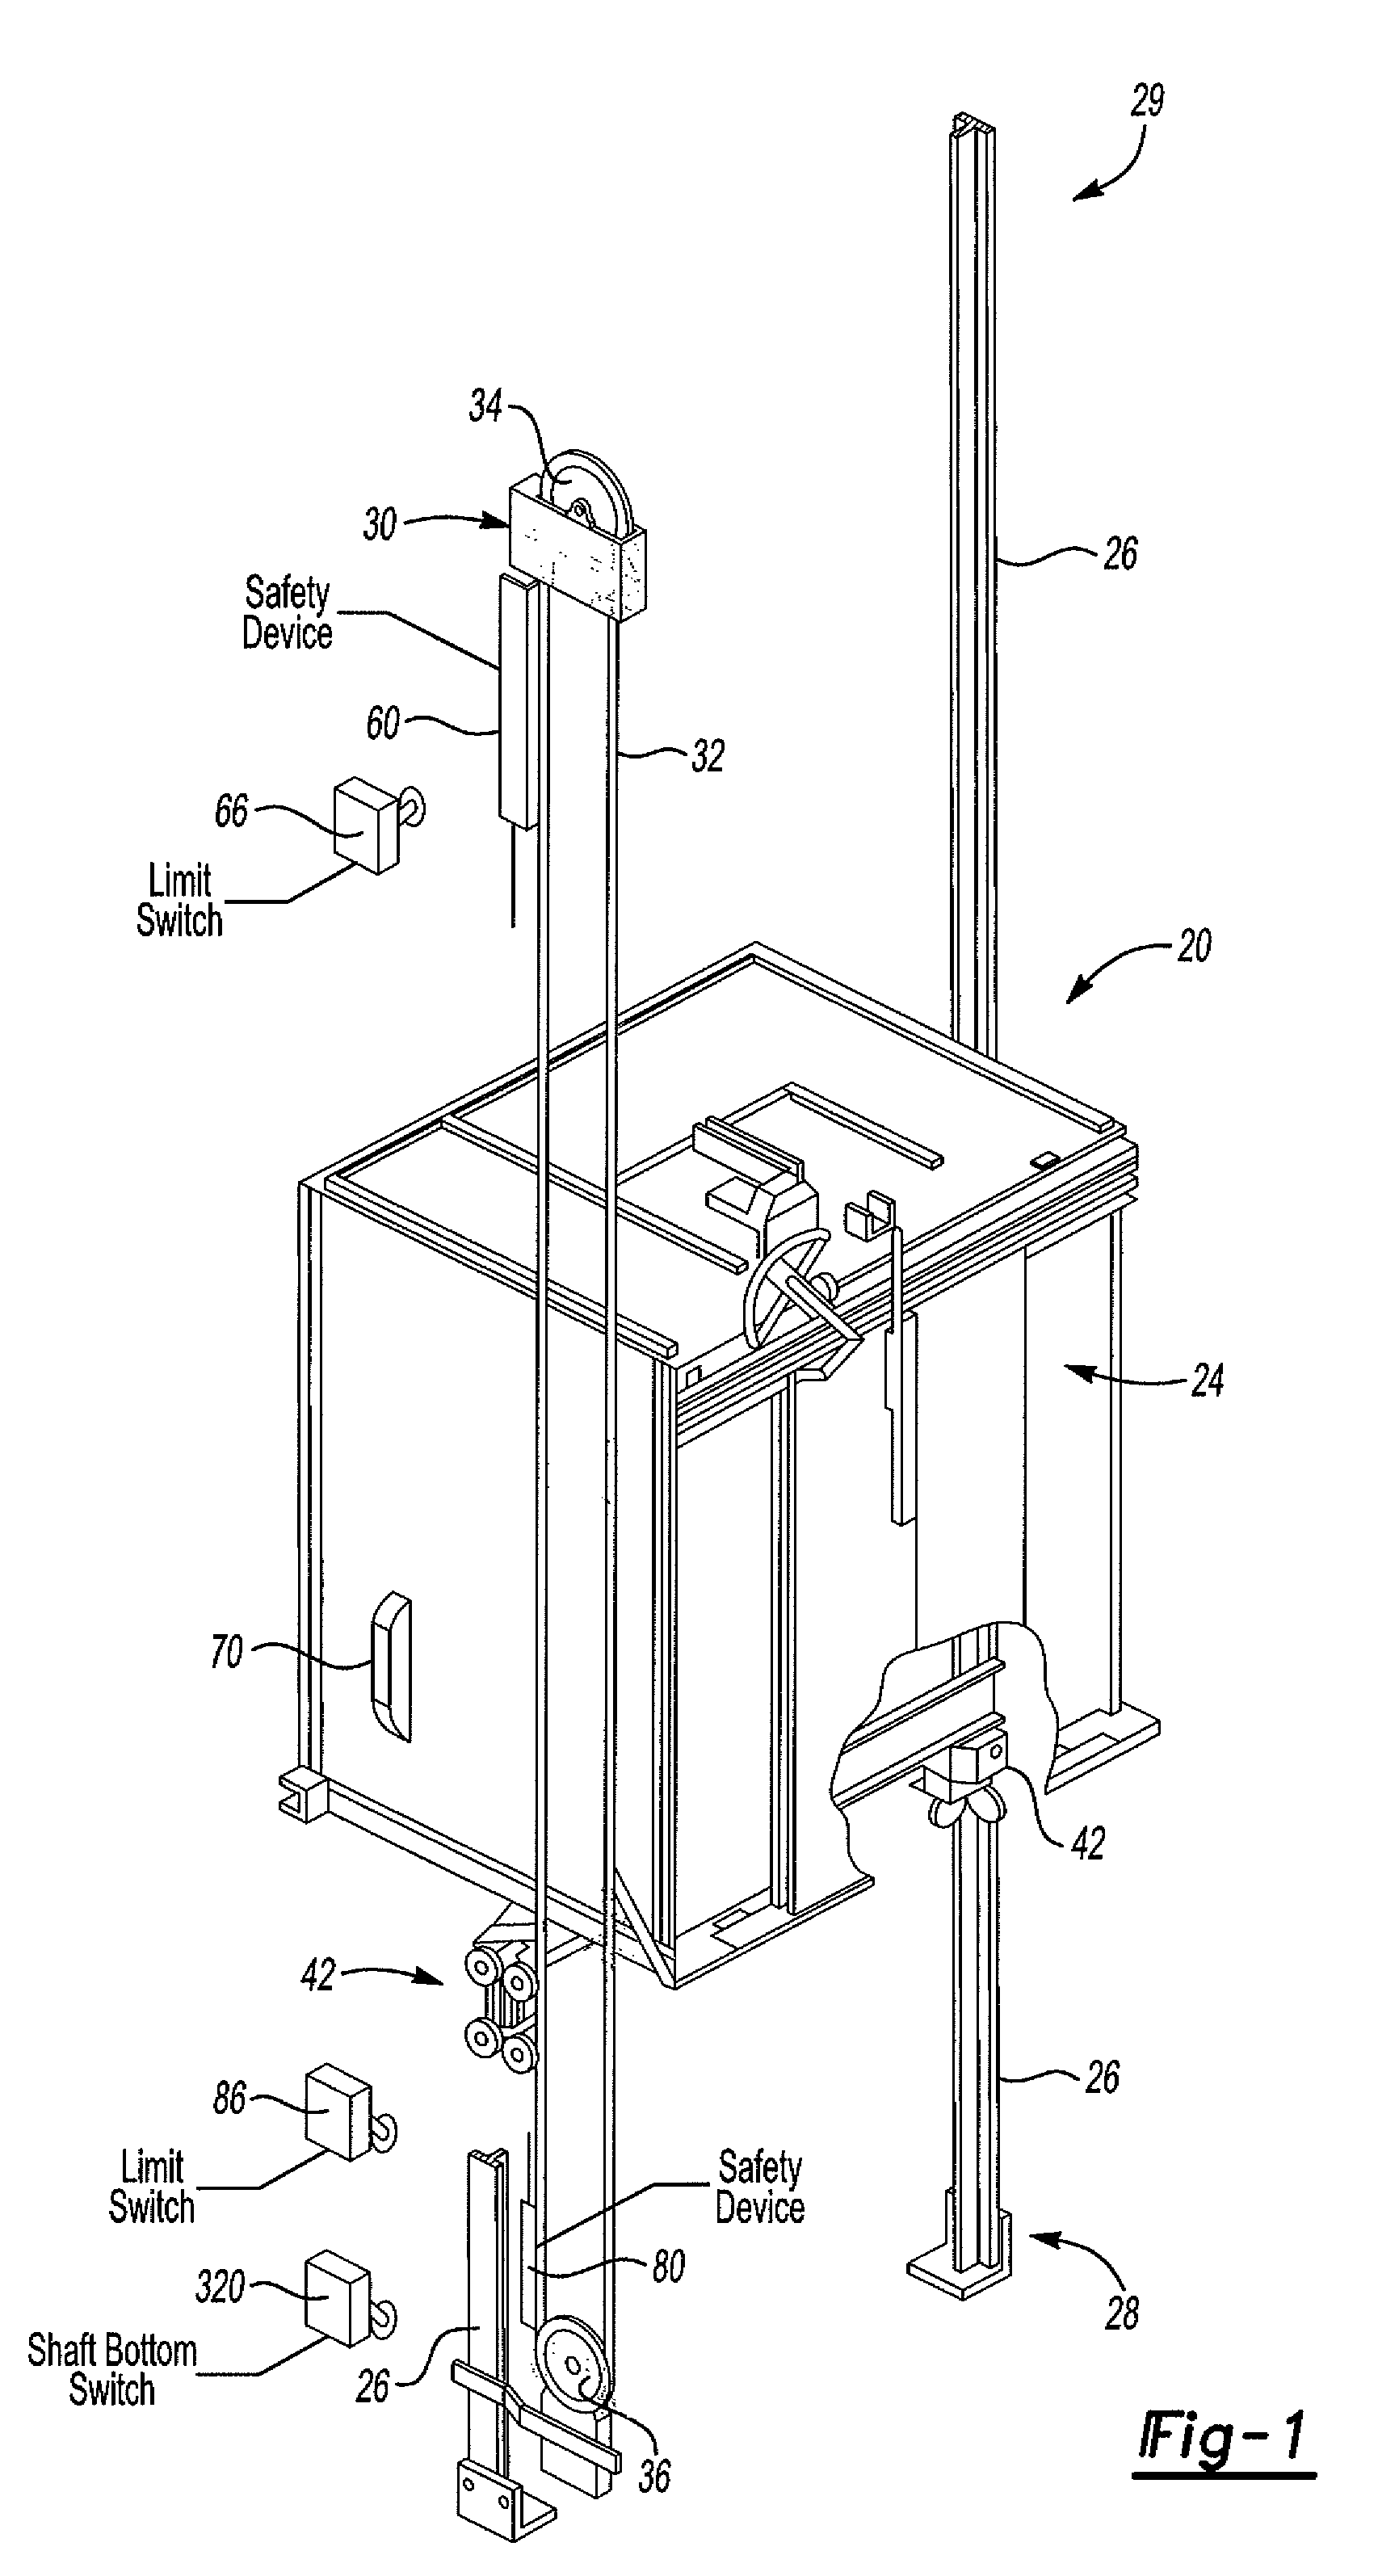 Elevator having a limit switch for controlling power to the drive system as an elevator car approaches a shallow pit or a low overhead